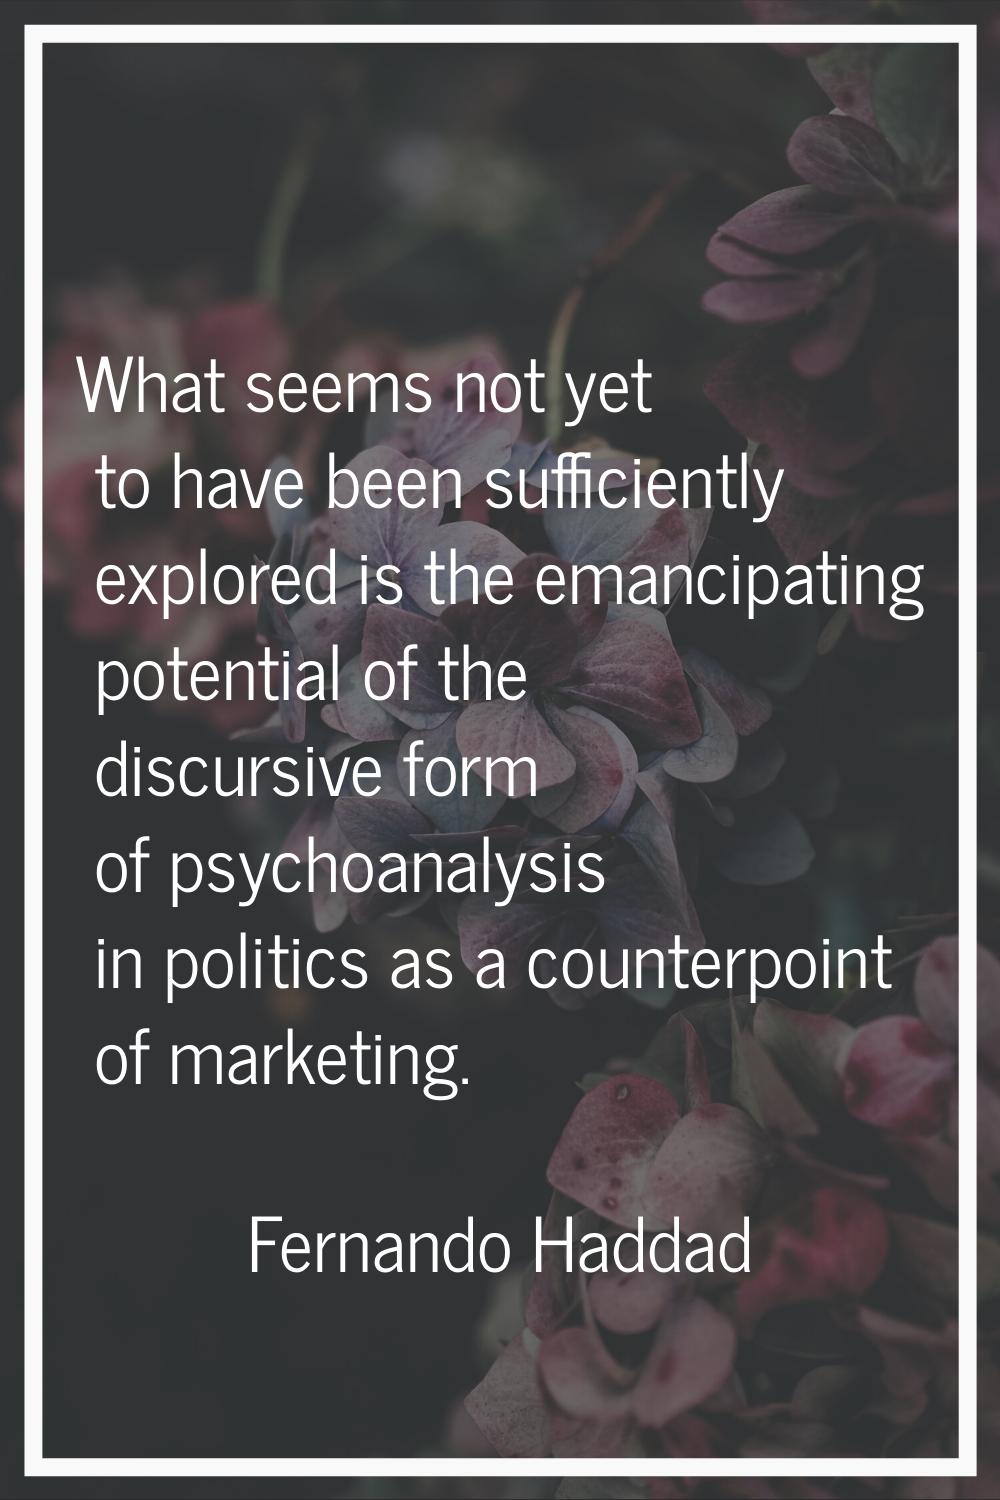 What seems not yet to have been sufficiently explored is the emancipating potential of the discursi